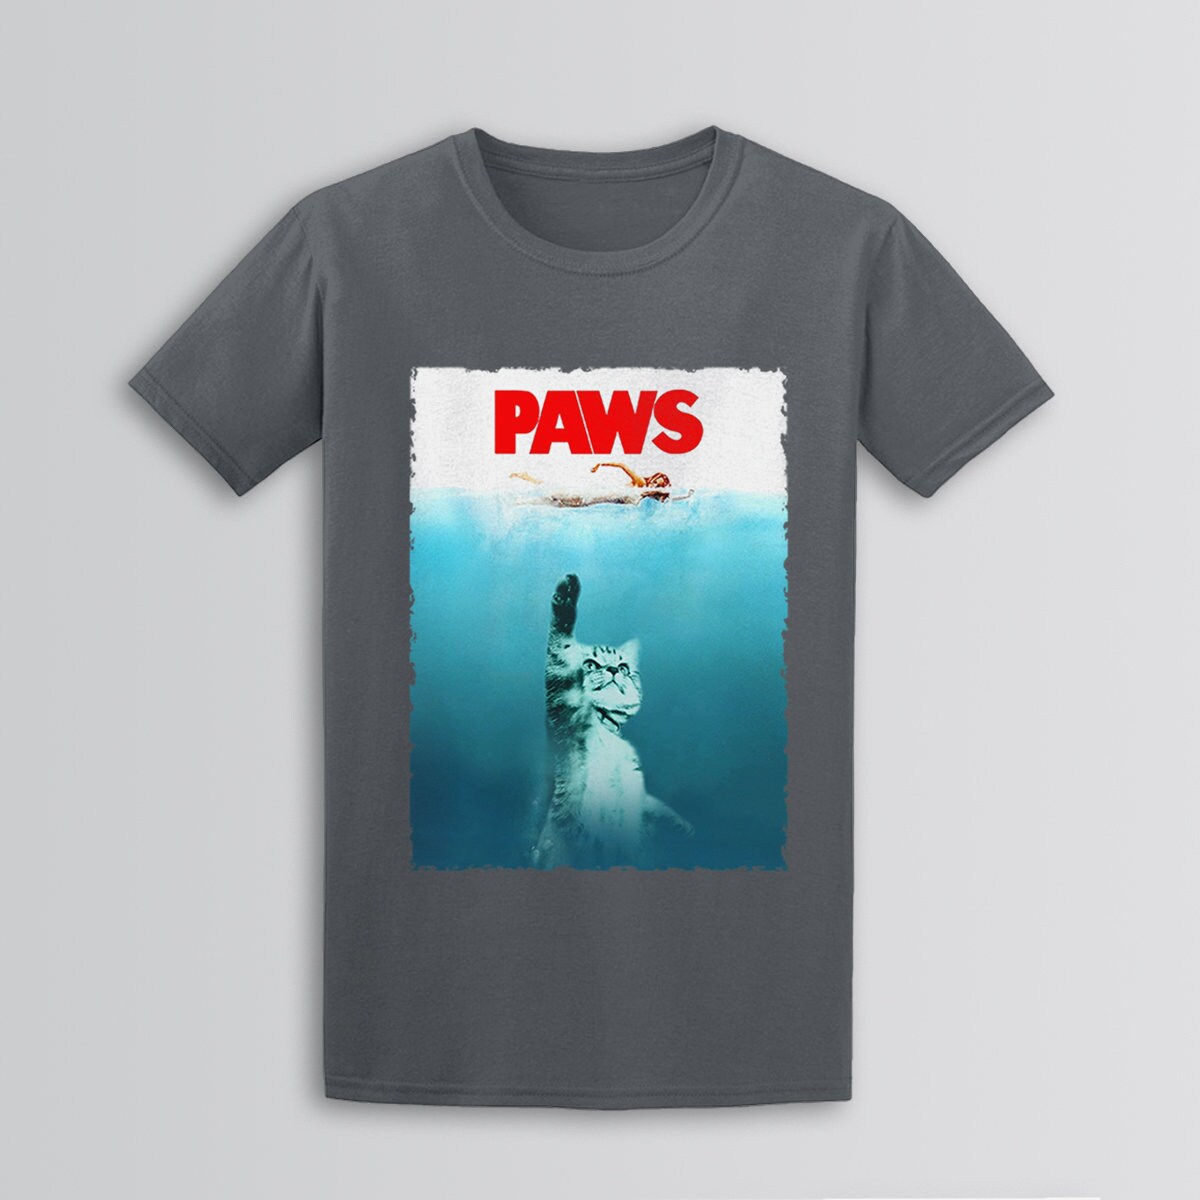 Discover Jaws PAWS Parody Graphic T-Shirts